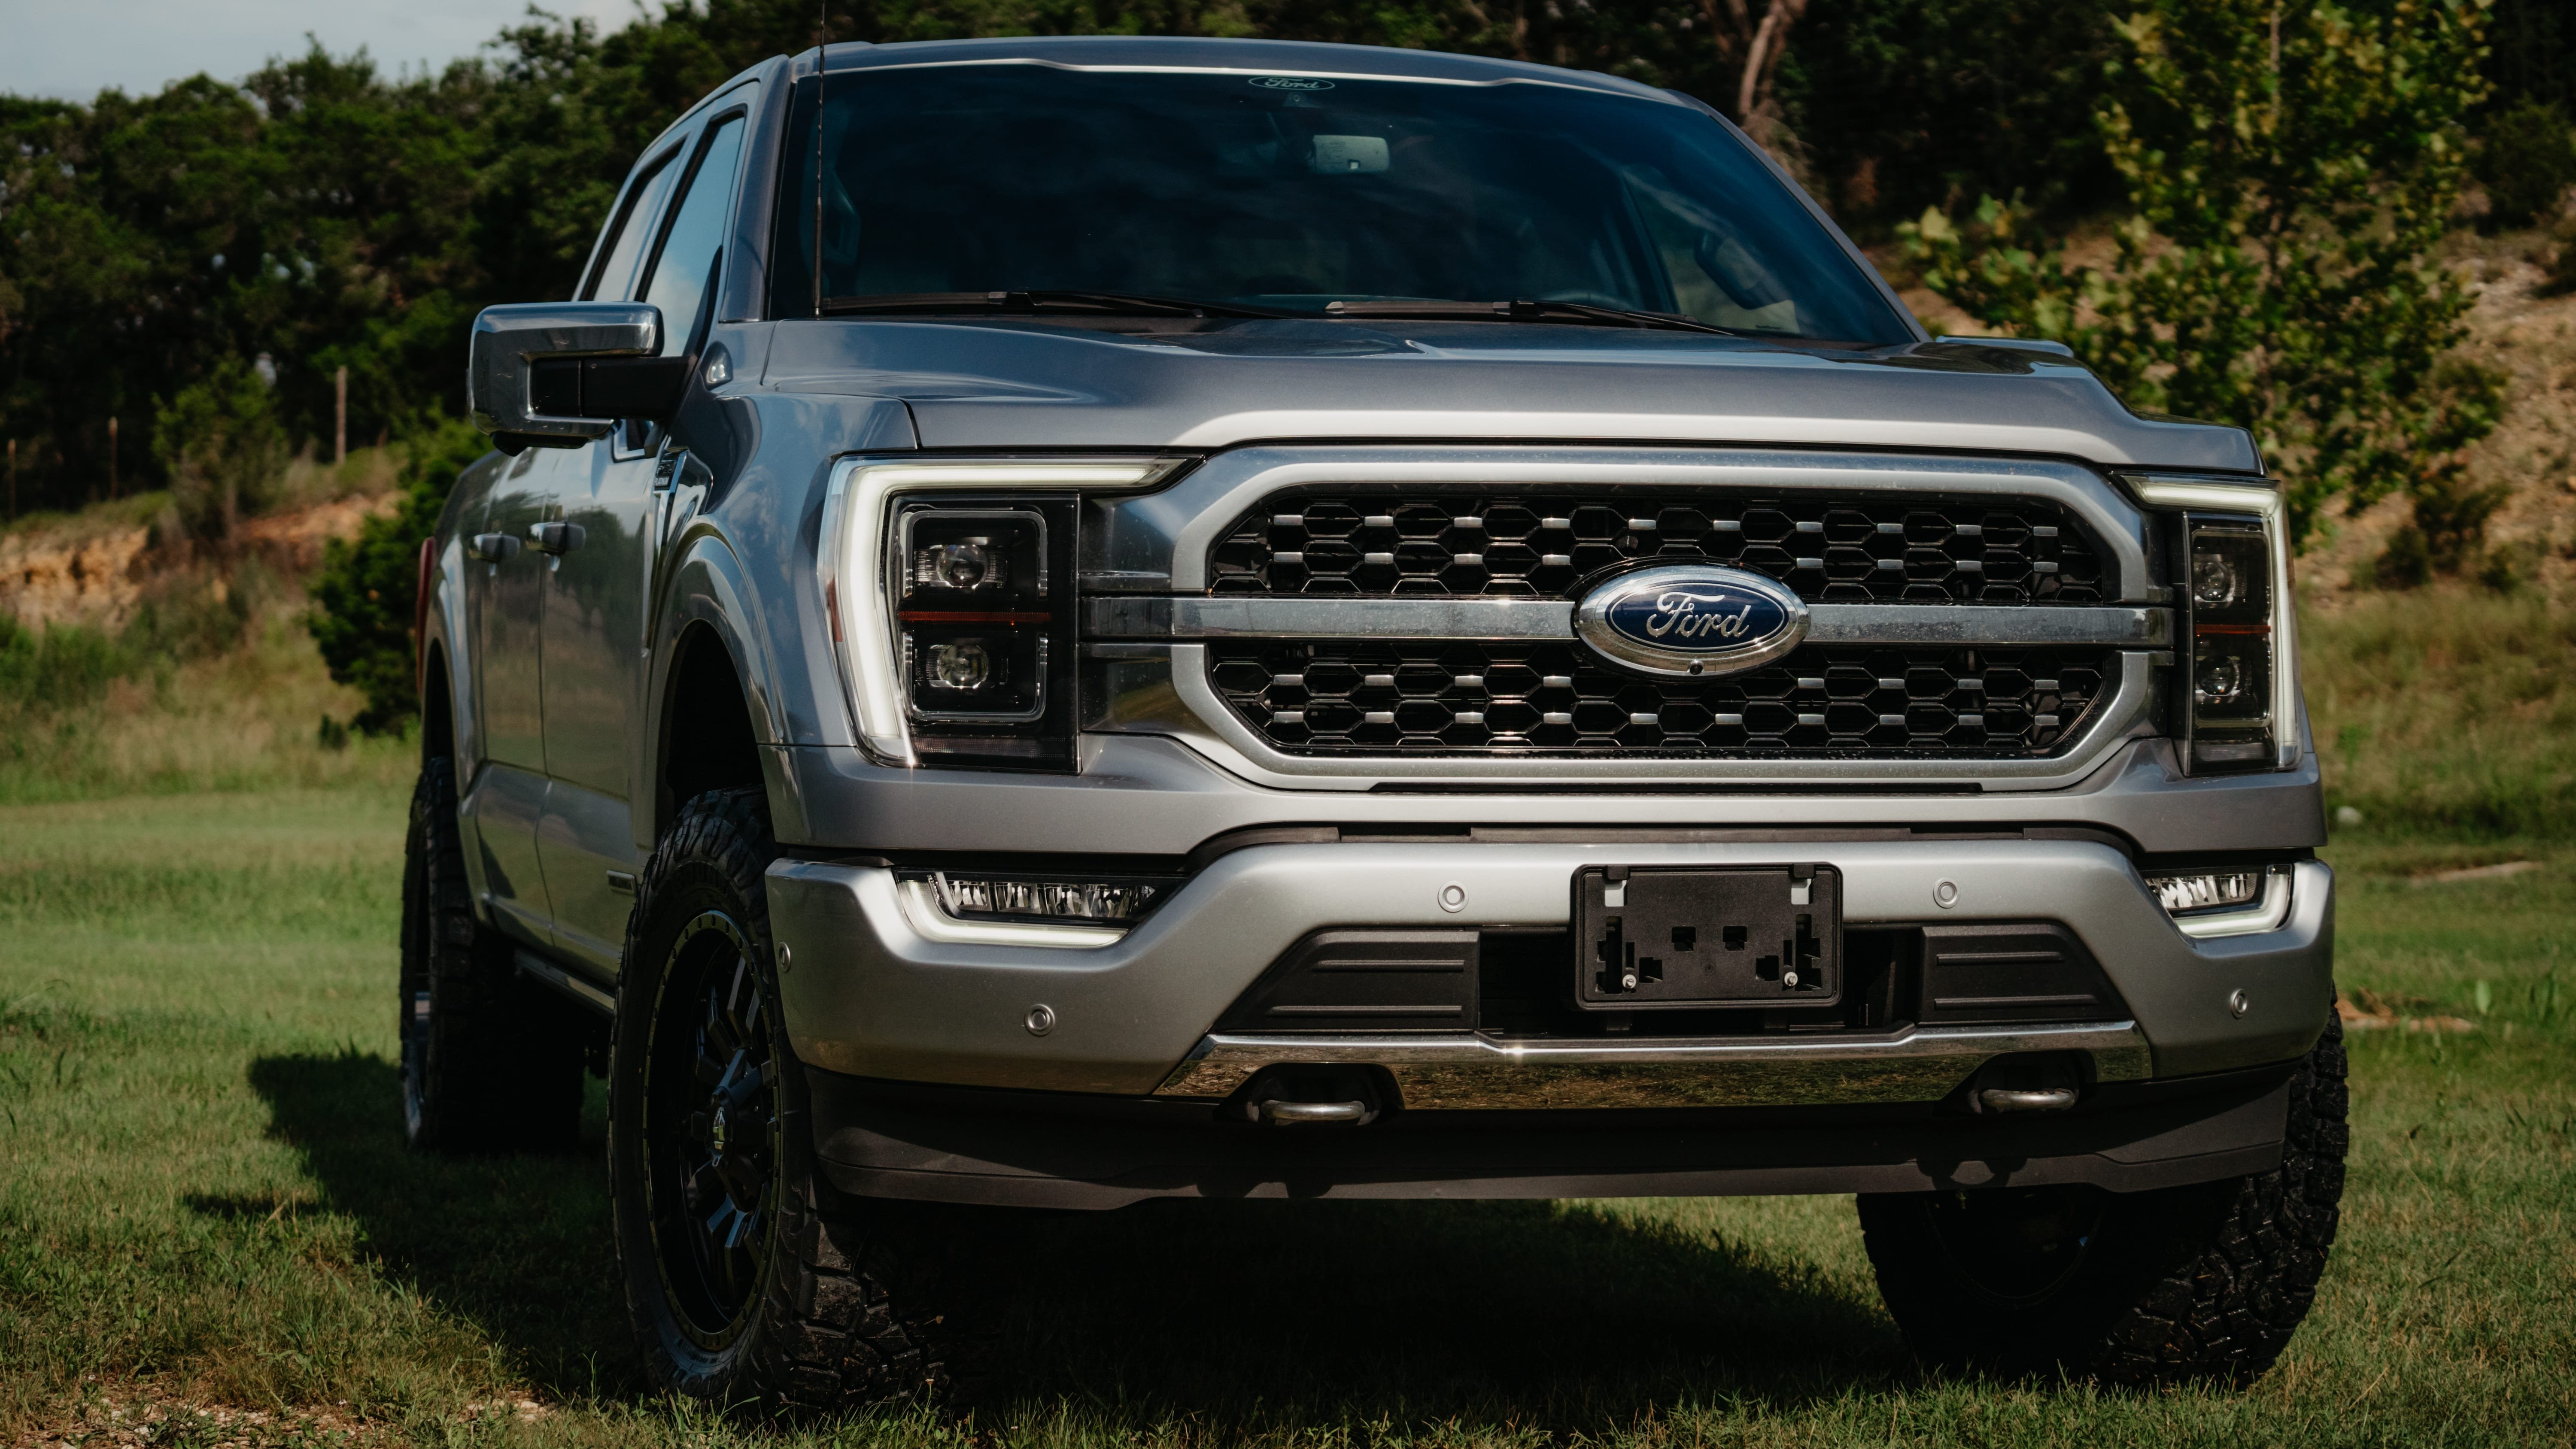 2021 Ford F-150 Platinum in Silver with Open Country ATIII 295/60R20 Tires, 20" Fuel Wheels